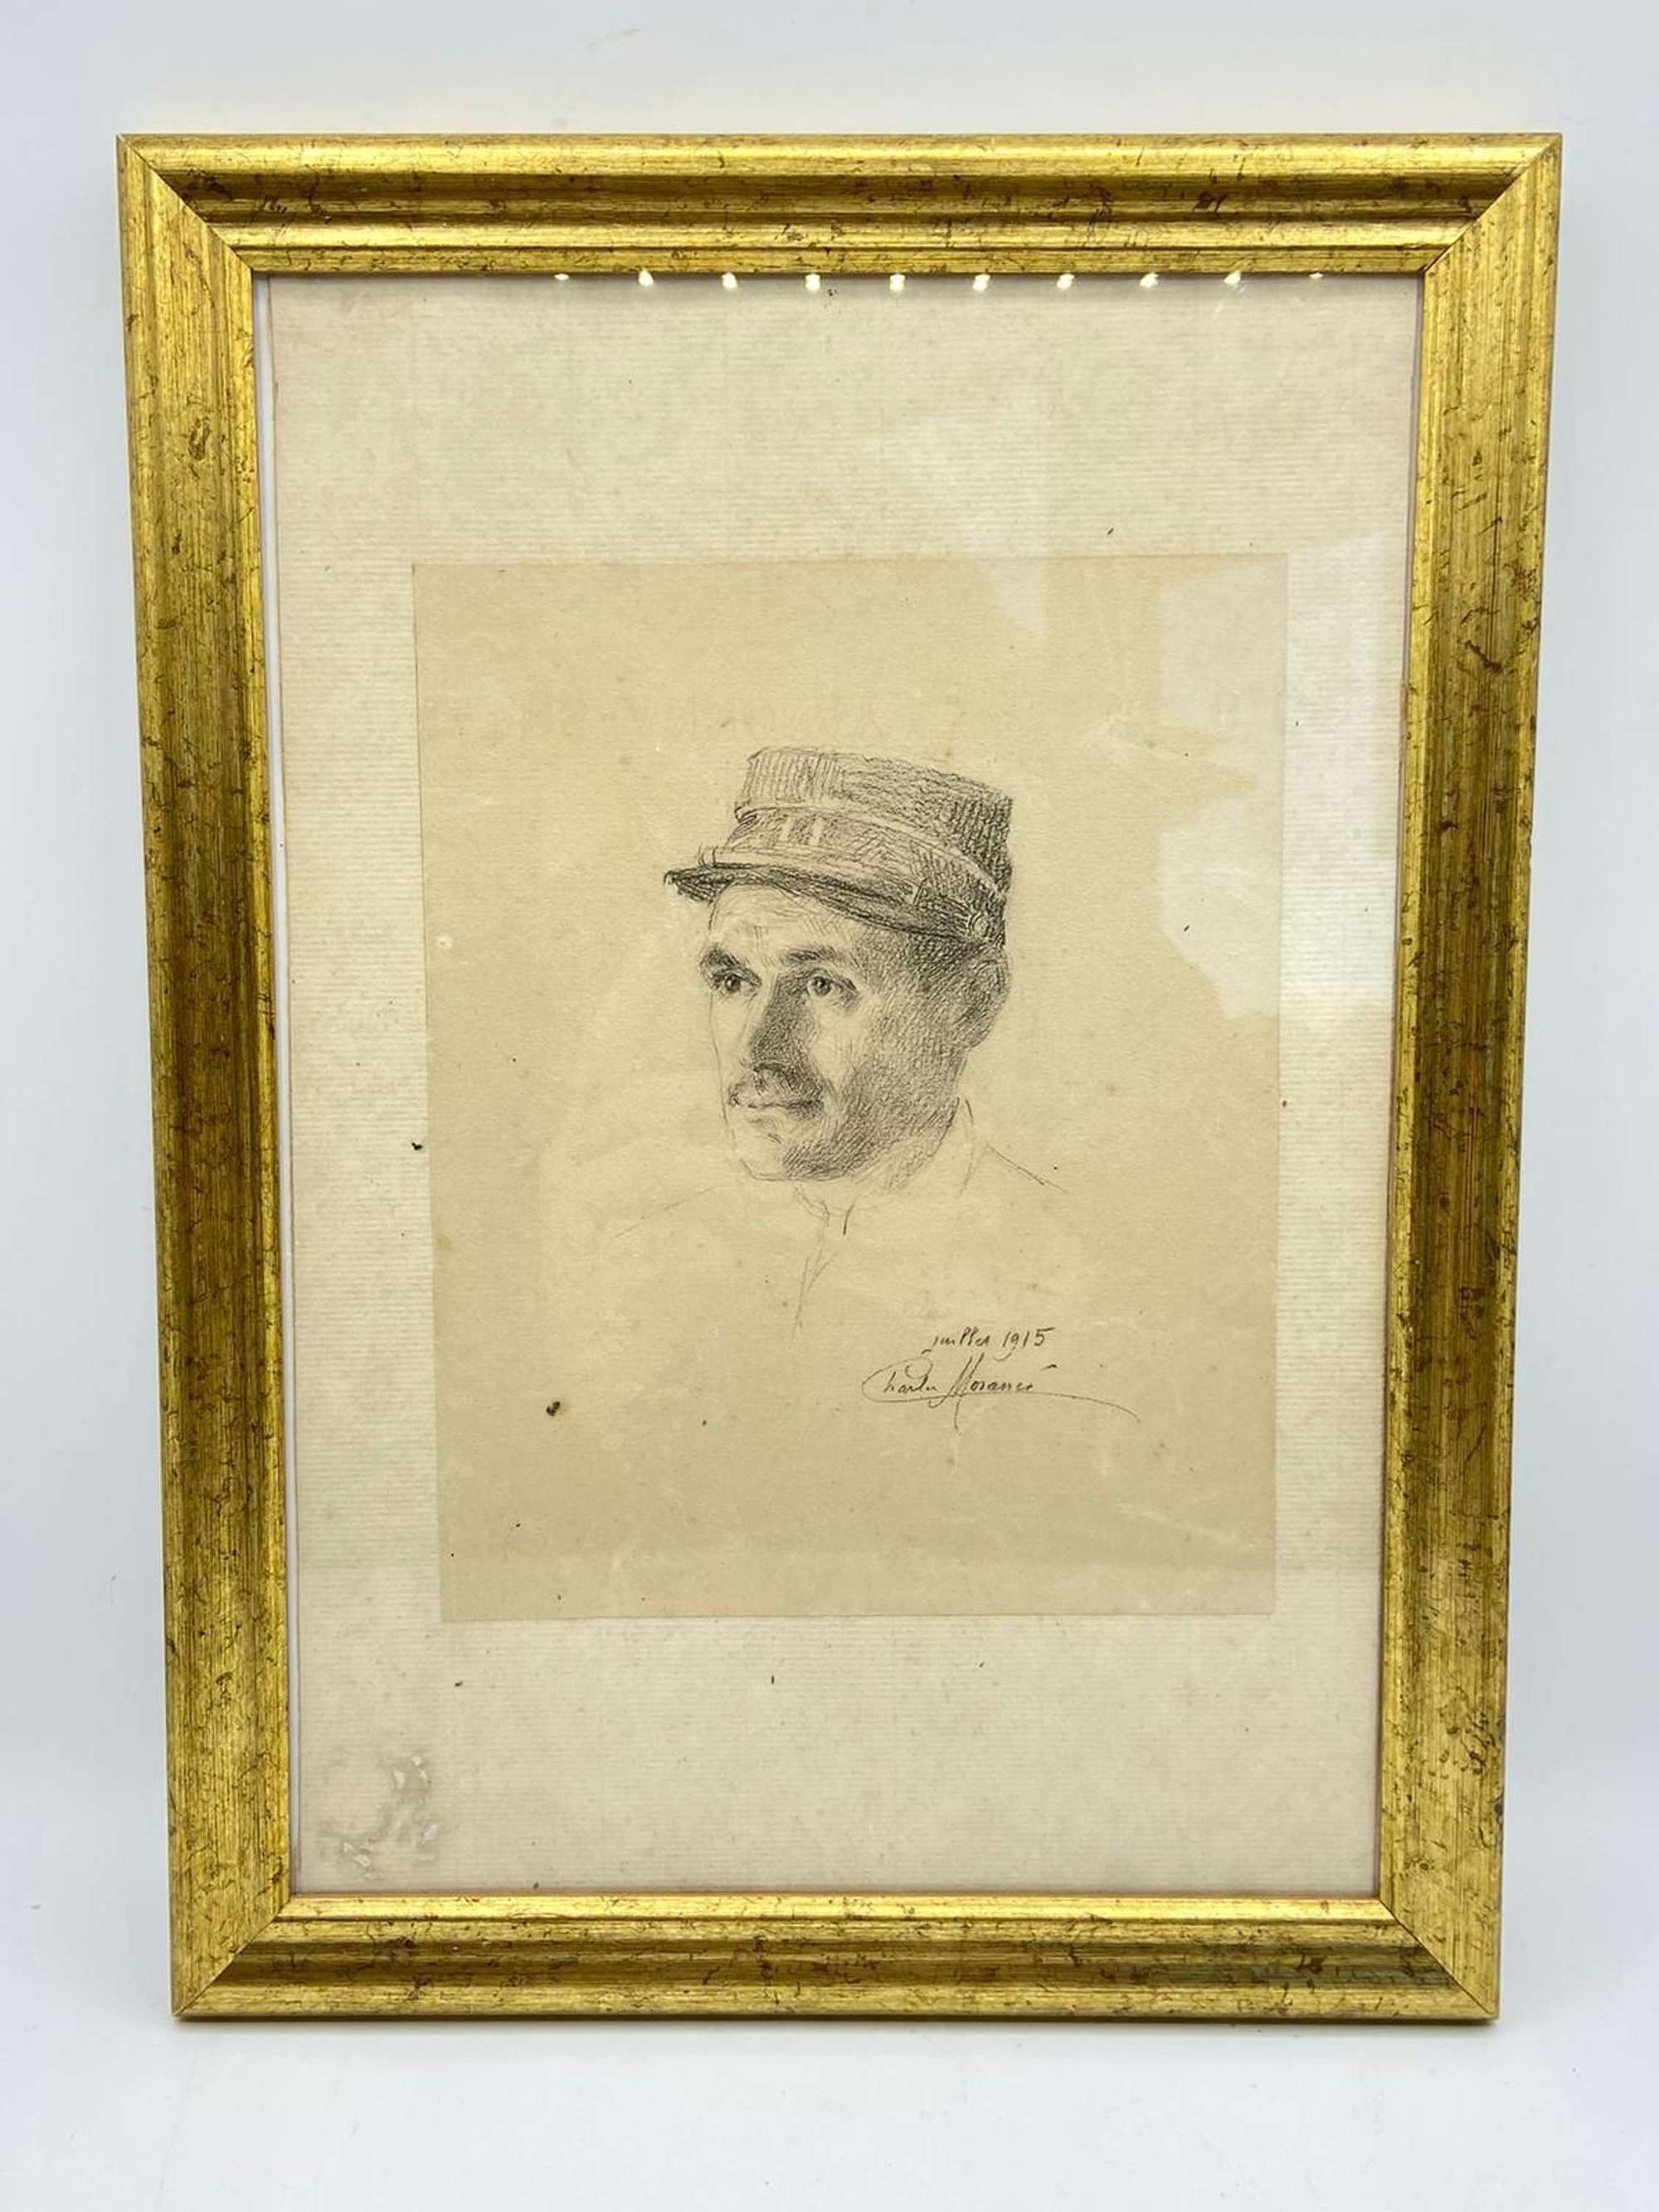 WW1 French Infantry Officer Hand Drawn Portrait Drawing Signed & Dated